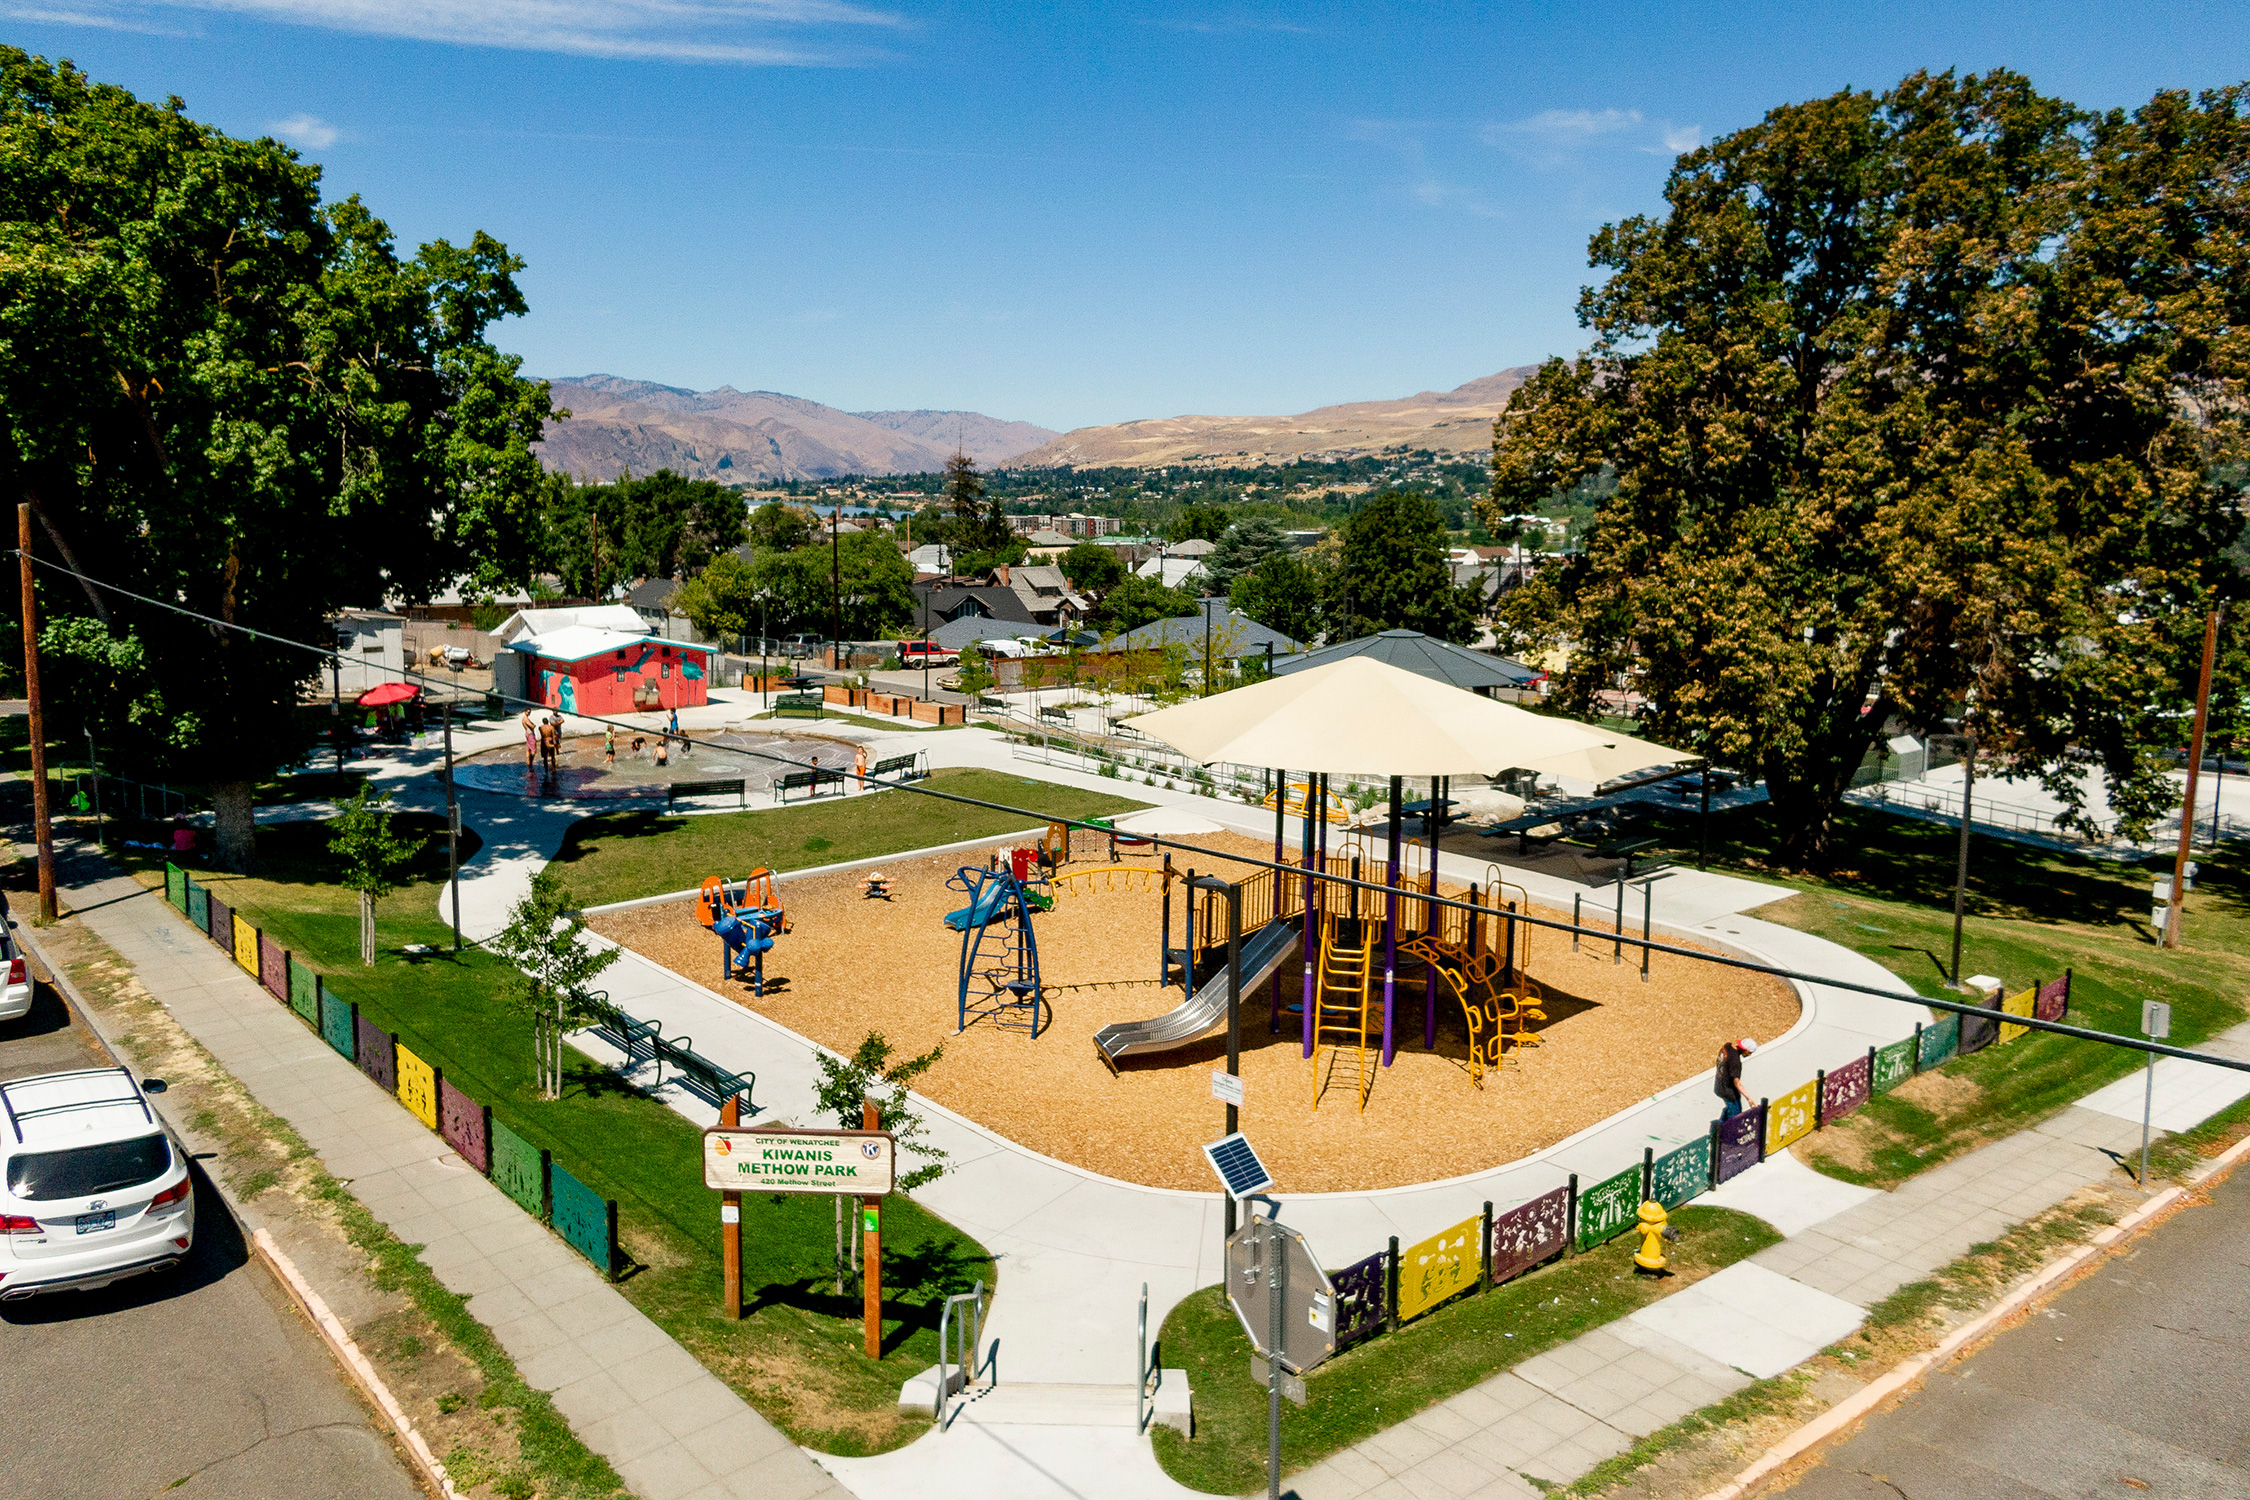 An aerial view of a playground in a neighborhood.